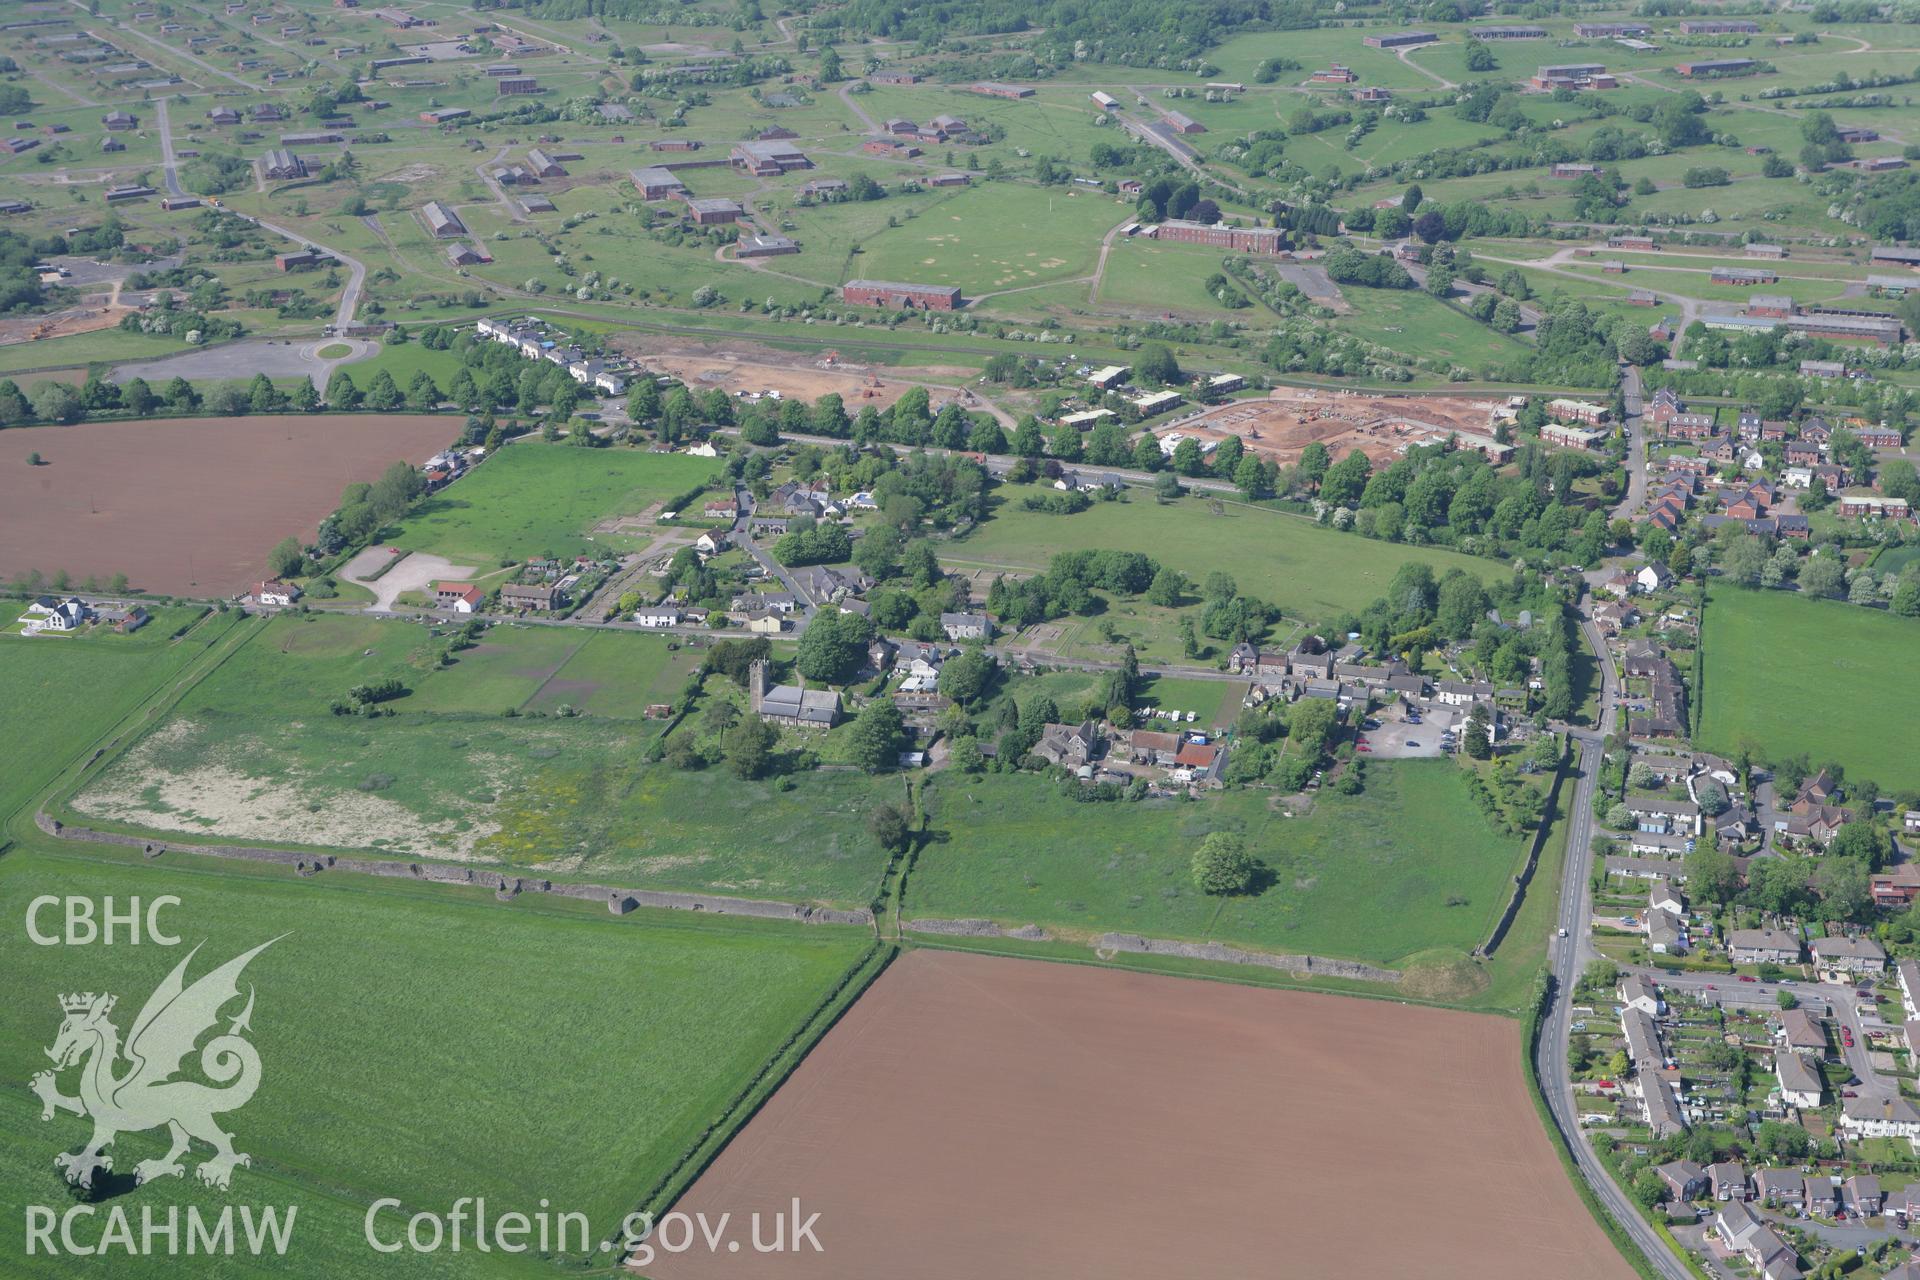 RCAHMW colour oblique photograph of Caerwent Roman City. Taken by Toby Driver on 24/05/2010.